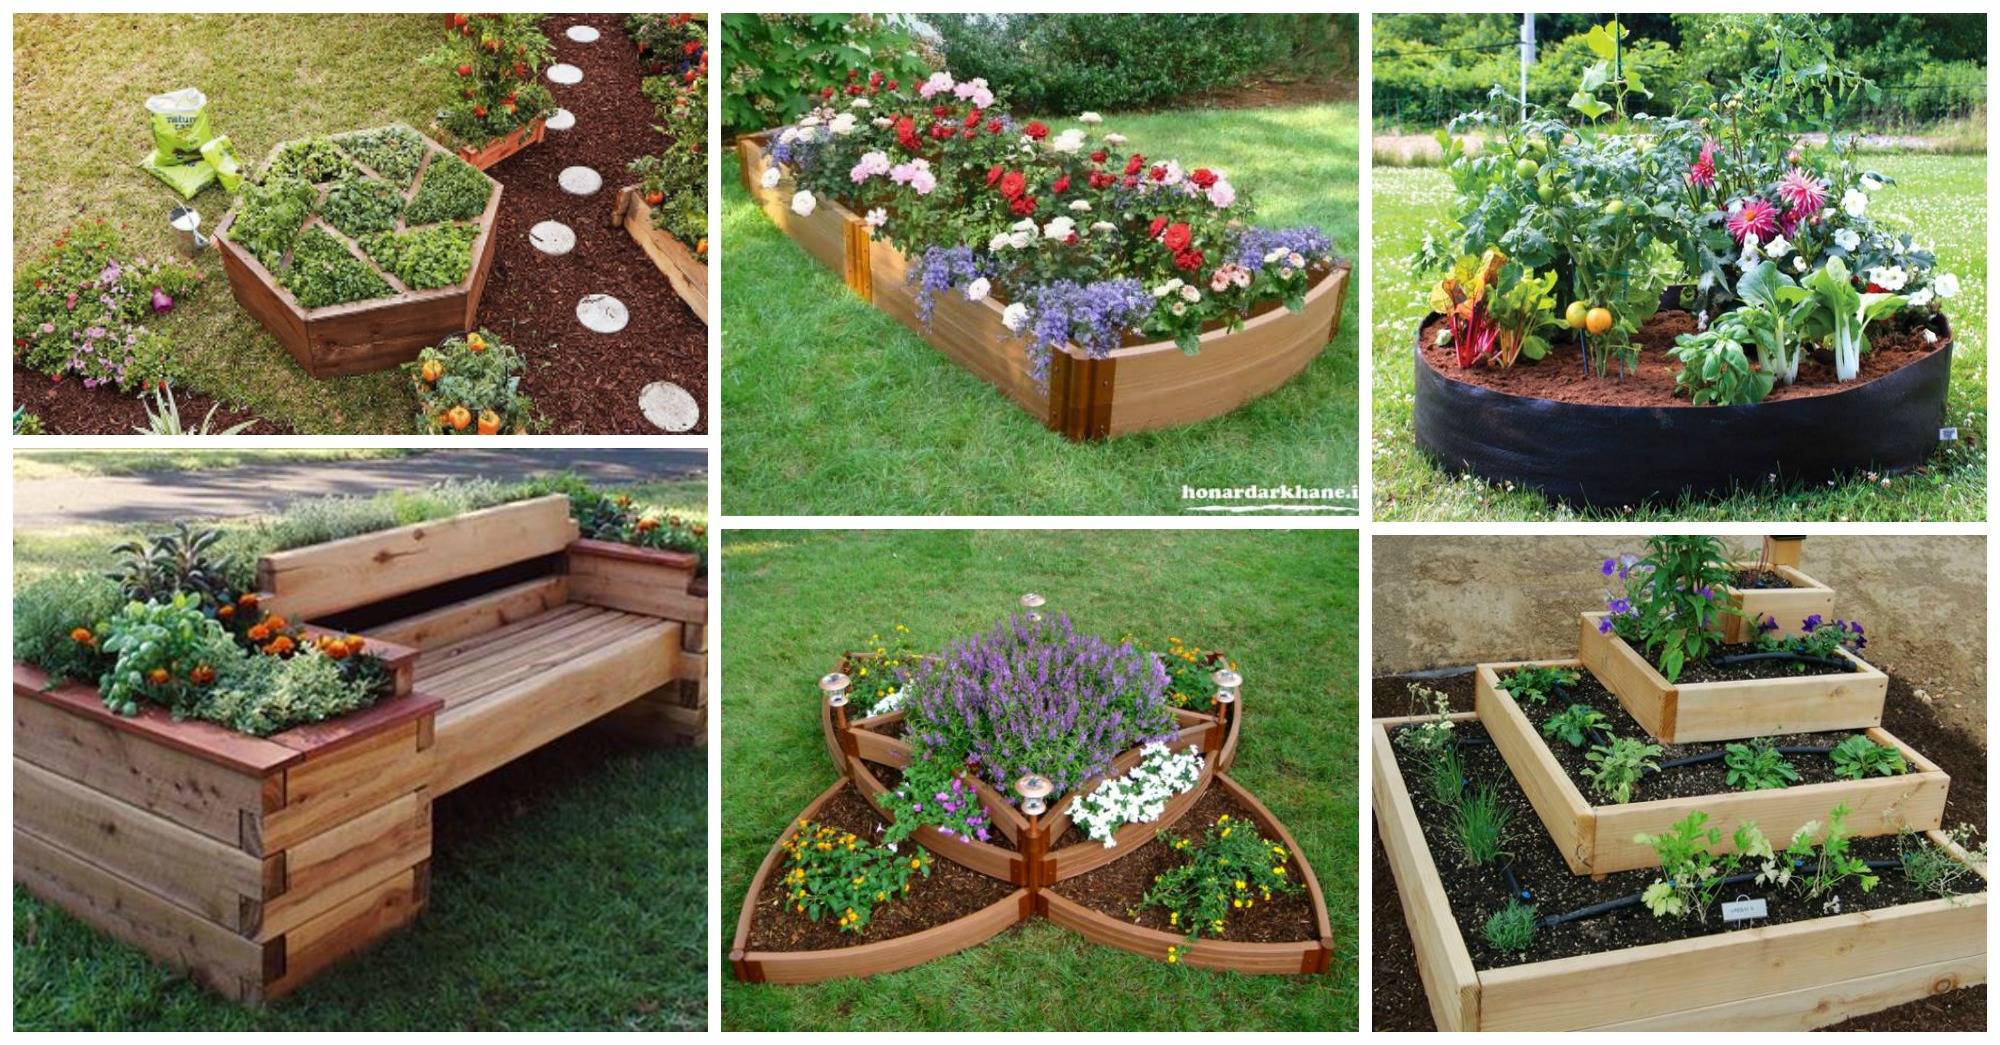 Inspirational Flowering Container Garden Projects